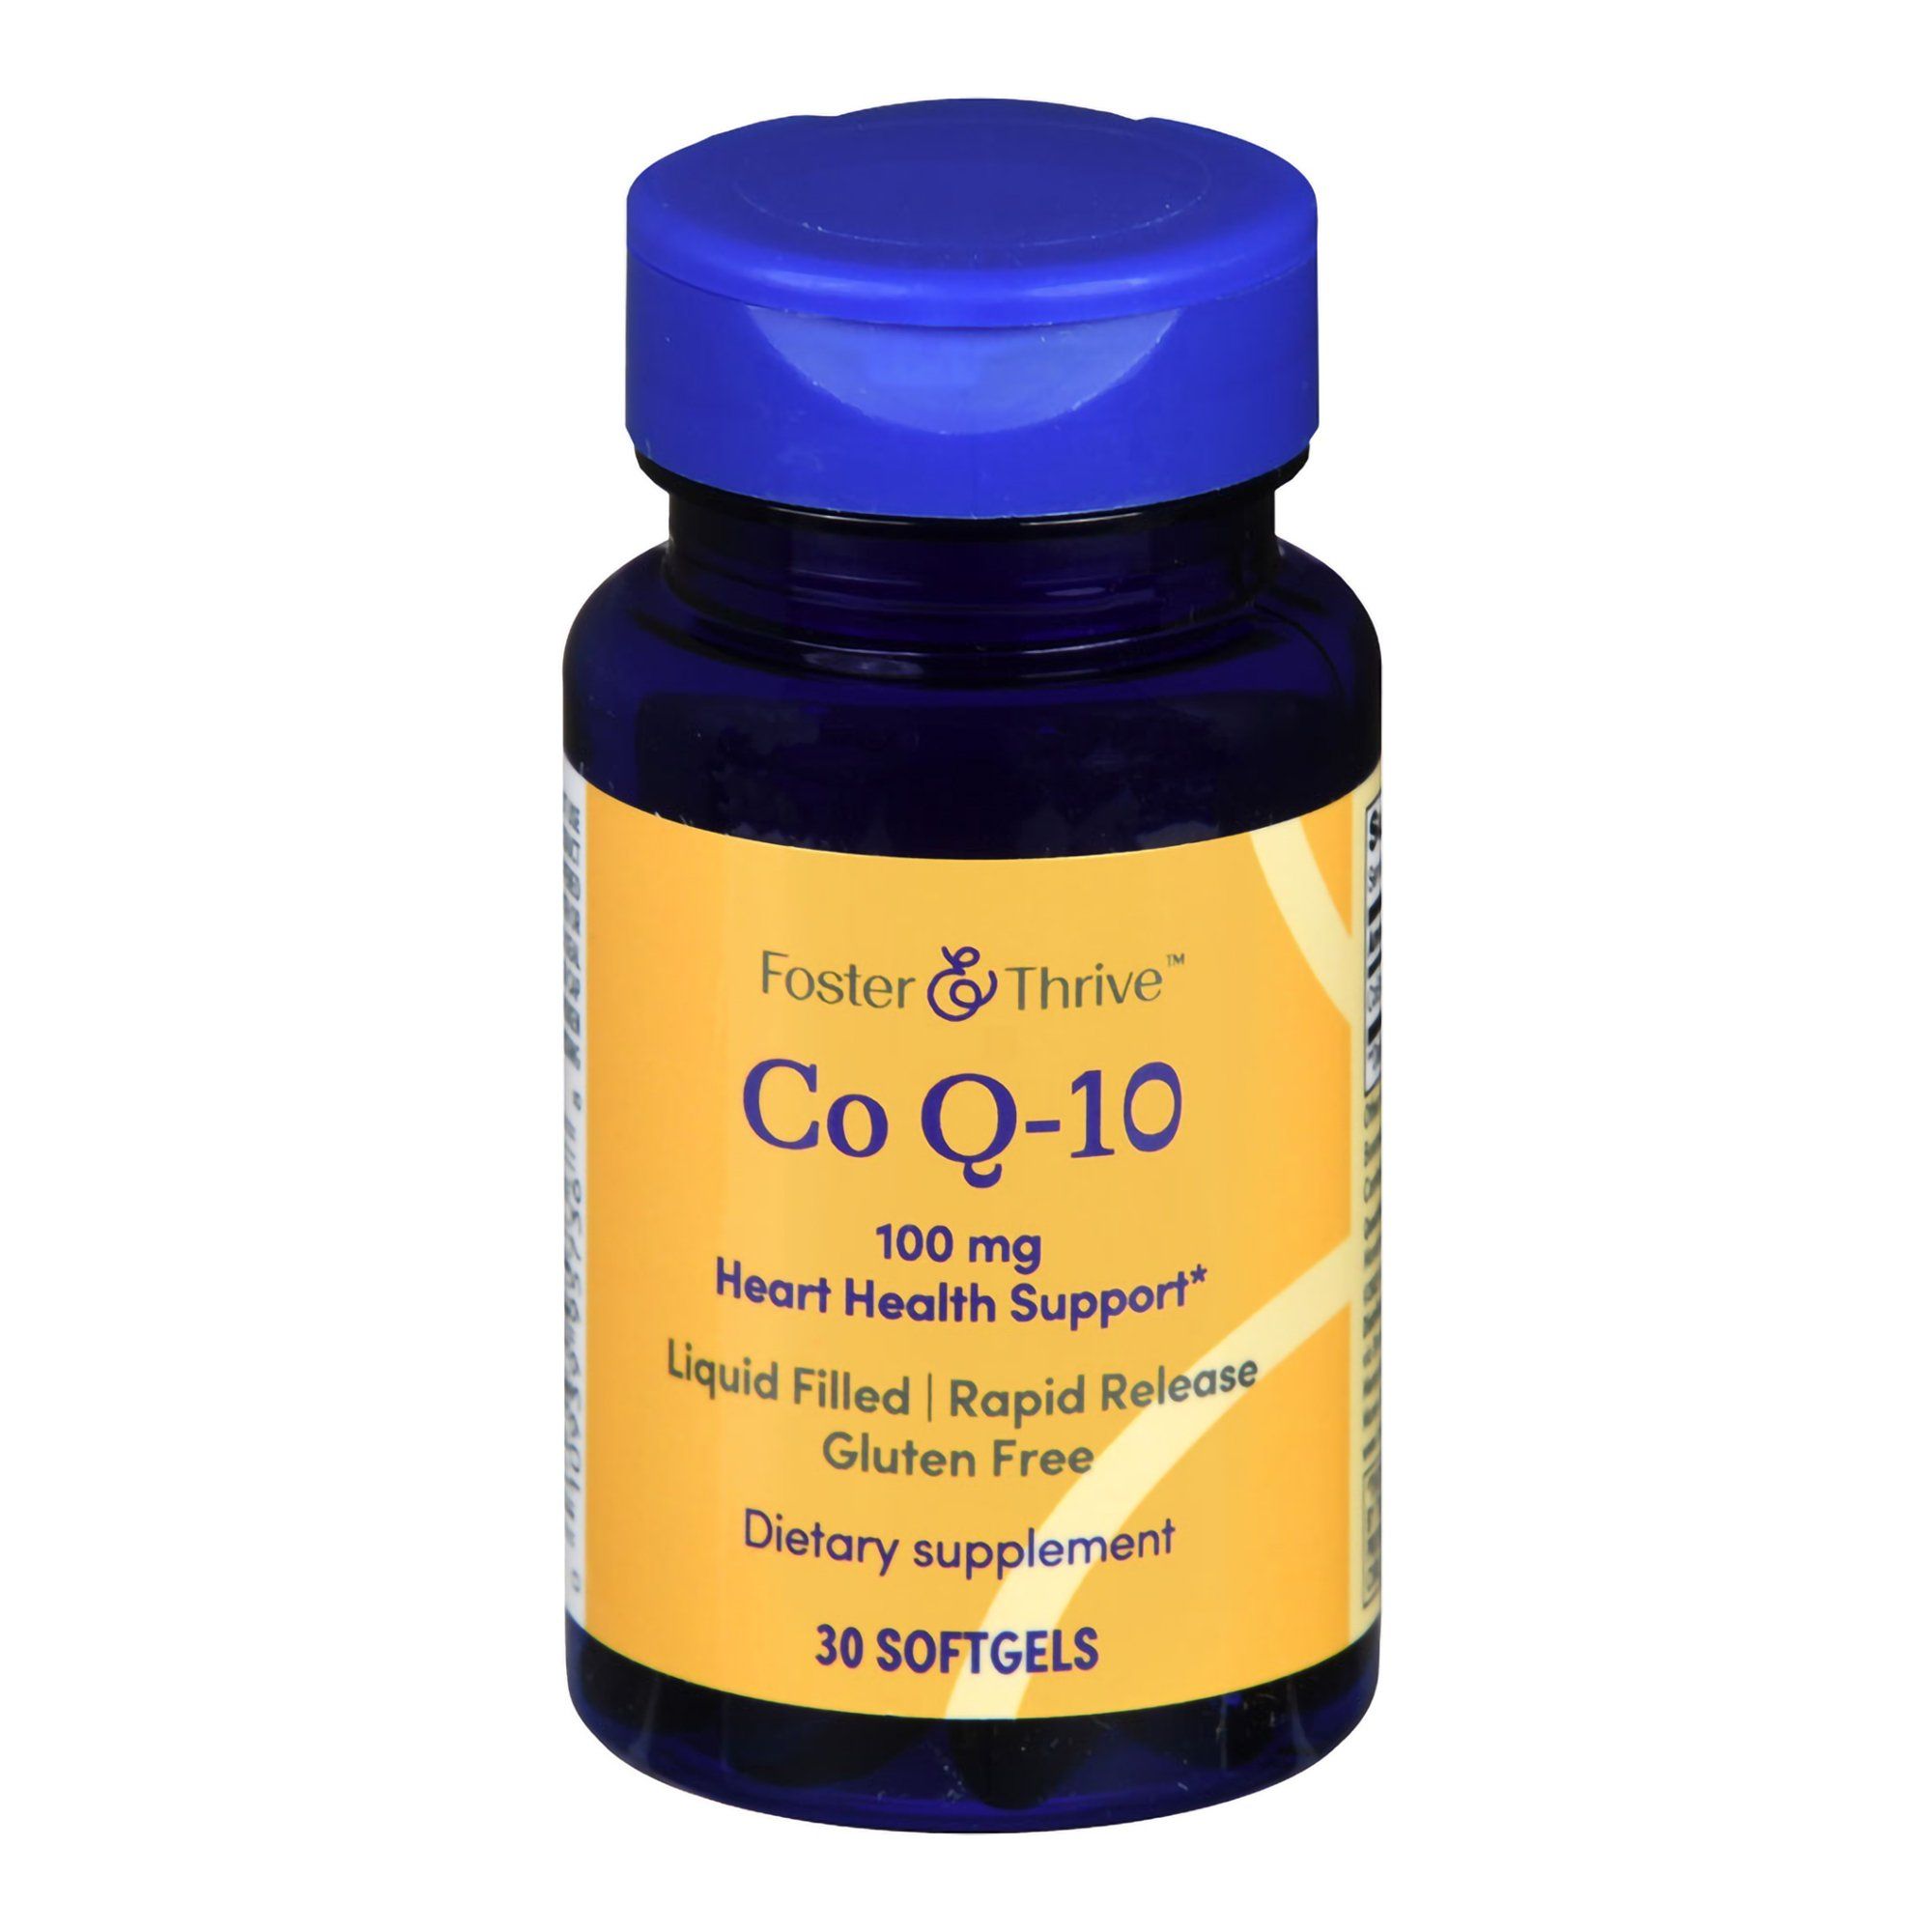 Foster & Thrive Co Q-10 Rapid Release Softgels, 100 mg - 30 ct